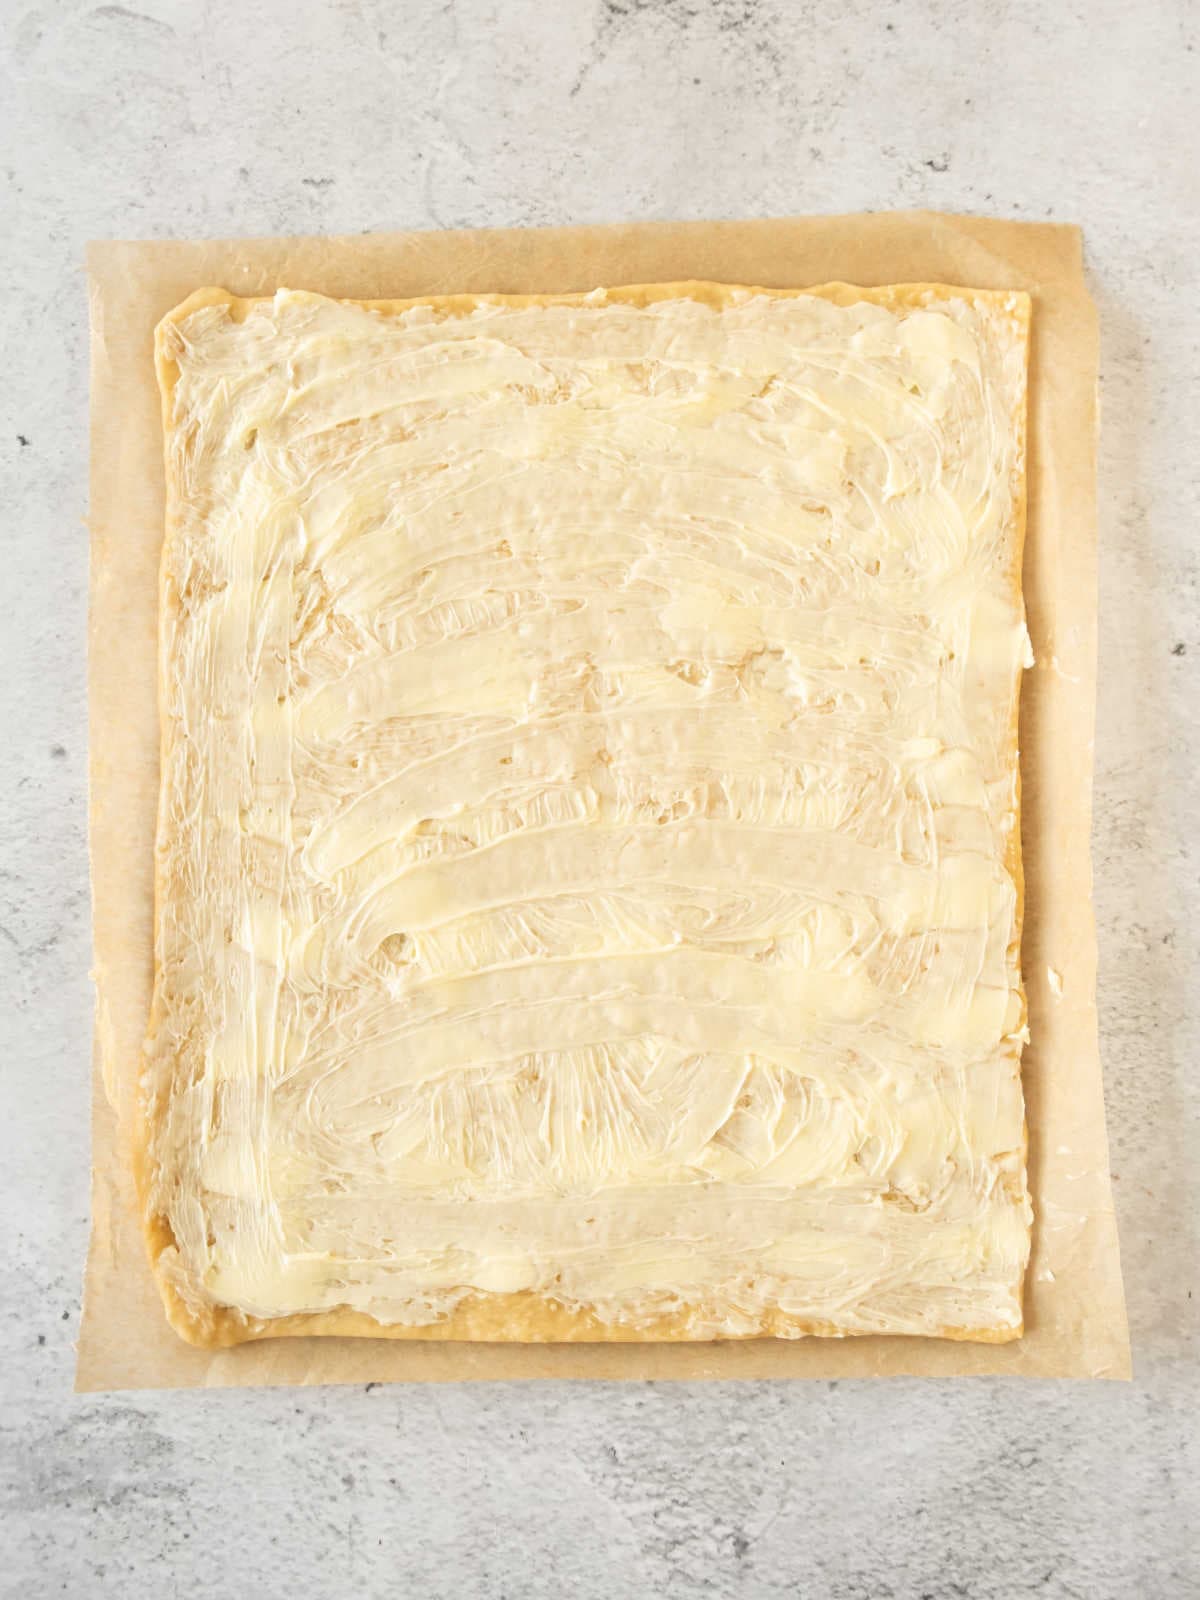 Buttered rectangle of dough on a beige paper. Light gray surface.